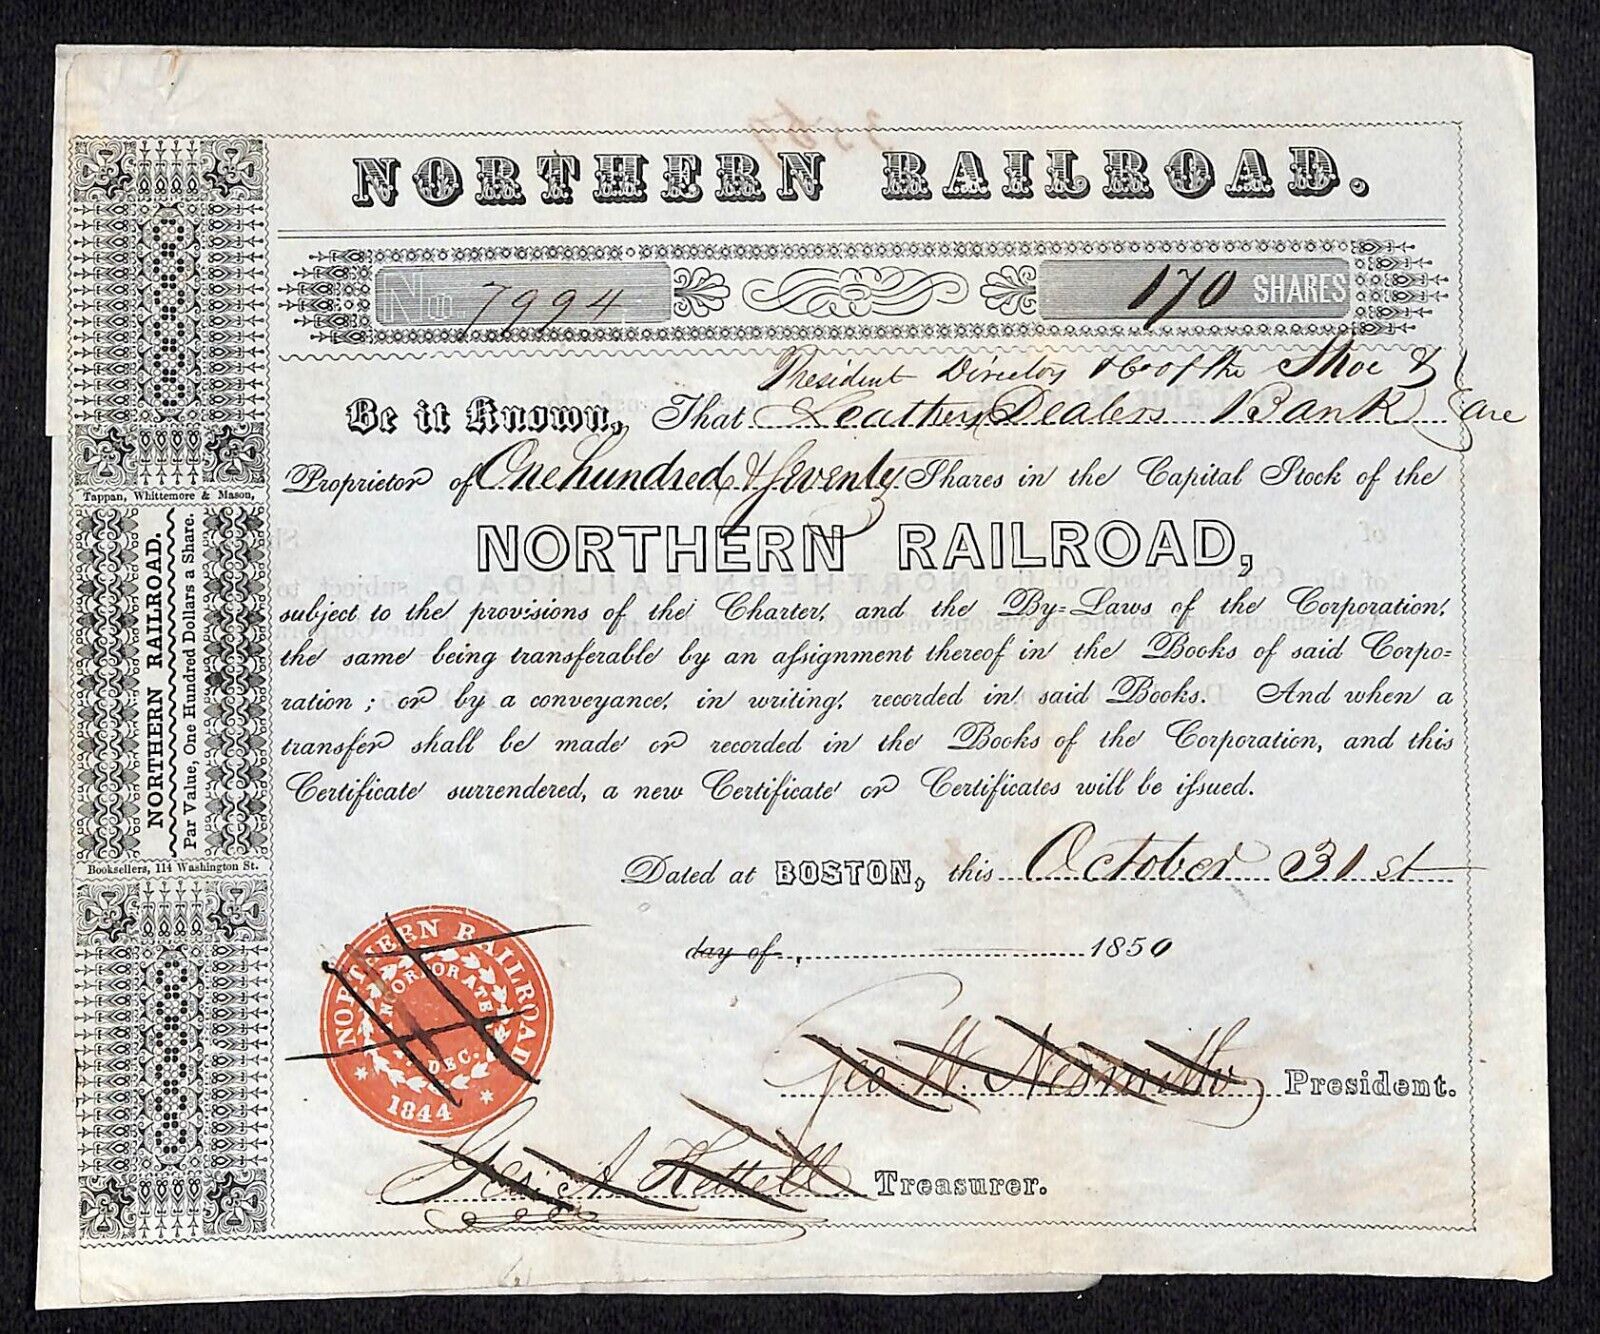 1850 Northern Railroad Stock Certificate & Affixed 1850 Power of Attorney Letter